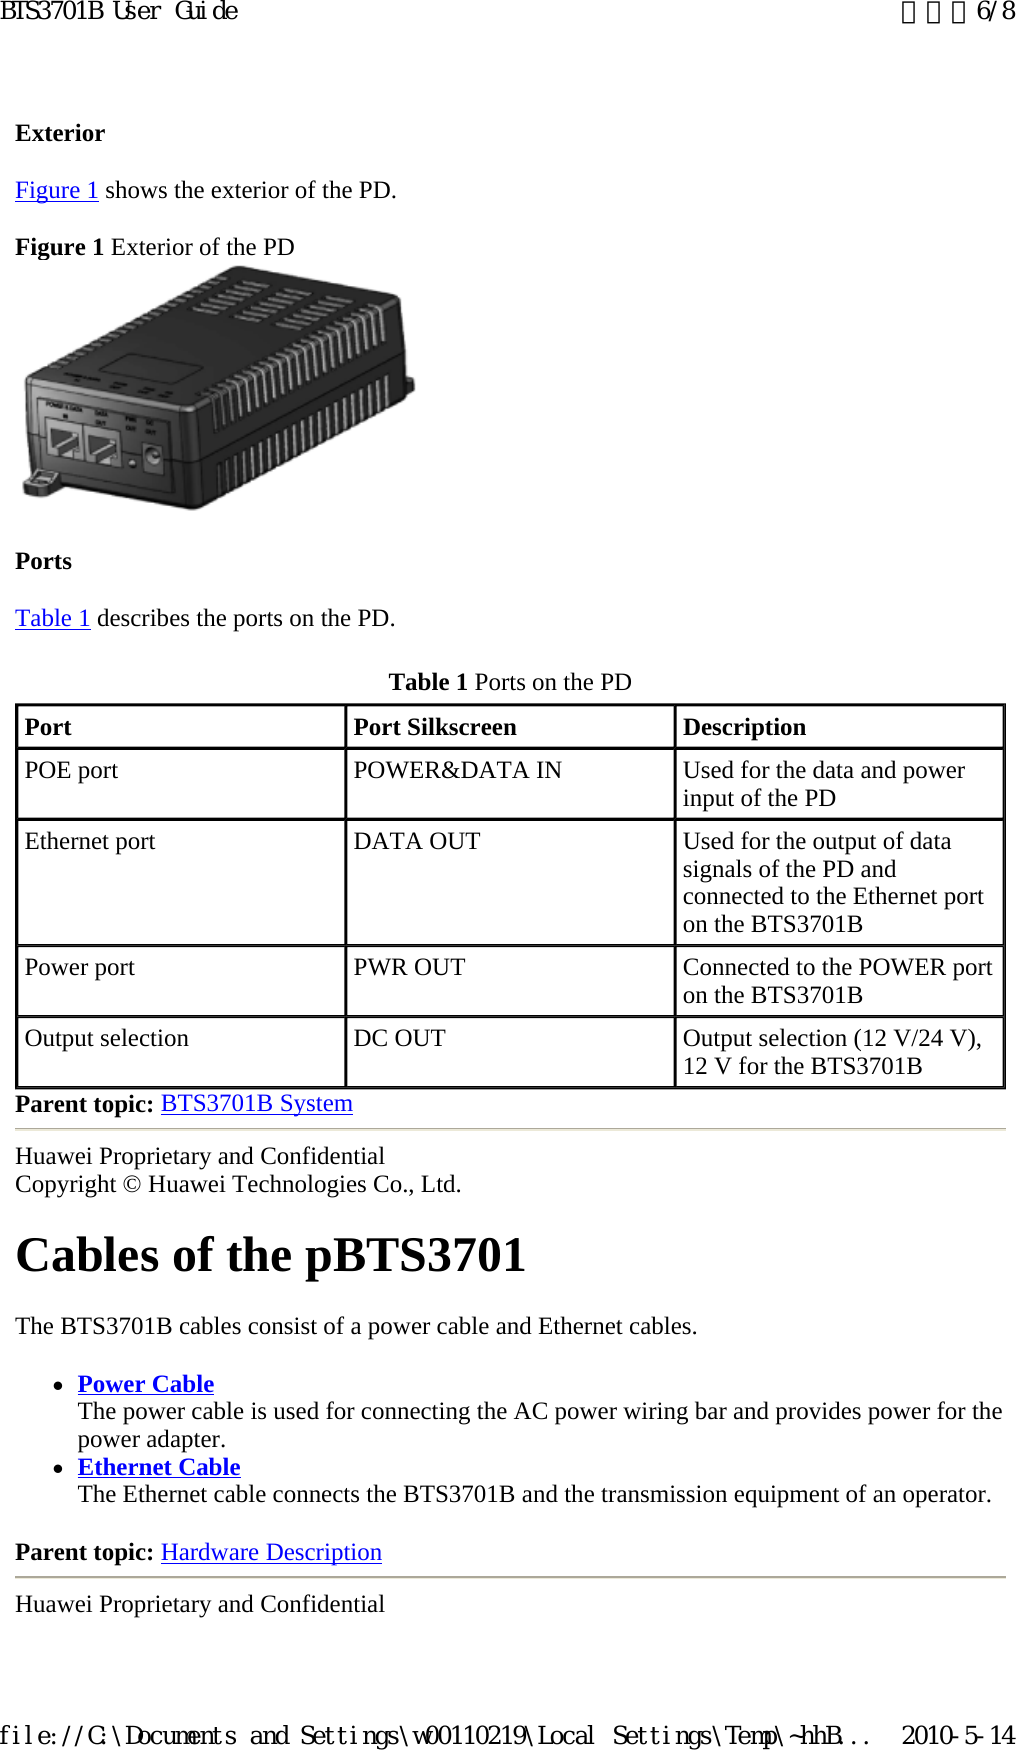 Exterior  Figure 1 shows the exterior of the PD.  Figure 1 Exterior of the PD   Ports  Table 1 describes the ports on the PD.  Parent topic: BTS3701B System Huawei Proprietary and Confidential Copyright © Huawei Technologies Co., Ltd. Cables of the pBTS3701  The BTS3701B cables consist of a power cable and Ethernet cables.  zPower Cable The power cable is used for connecting the AC power wiring bar and provides power for the power adapter.  zEthernet Cable The Ethernet cable connects the BTS3701B and the transmission equipment of an operator.  Parent topic: Hardware Description Huawei Proprietary and Confidential Table 1 Ports on the PD Port   Port Silkscreen   Description  POE port   POWER&amp;DATA IN  Used for the data and power input of the PD Ethernet port  DATA OUT  Used for the output of data signals of the PD and connected to the Ethernet port on the BTS3701B  Power port   PWR OUT  Connected to the POWER port on the BTS3701B Output selection   DC OUT  Output selection (12 V/24 V), 12 V for the BTS3701B 页码，6/8BTS3701B User Guide2010-5-14file://C:\Documents and Settings\w00110219\Local Settings\Temp\~hhB...